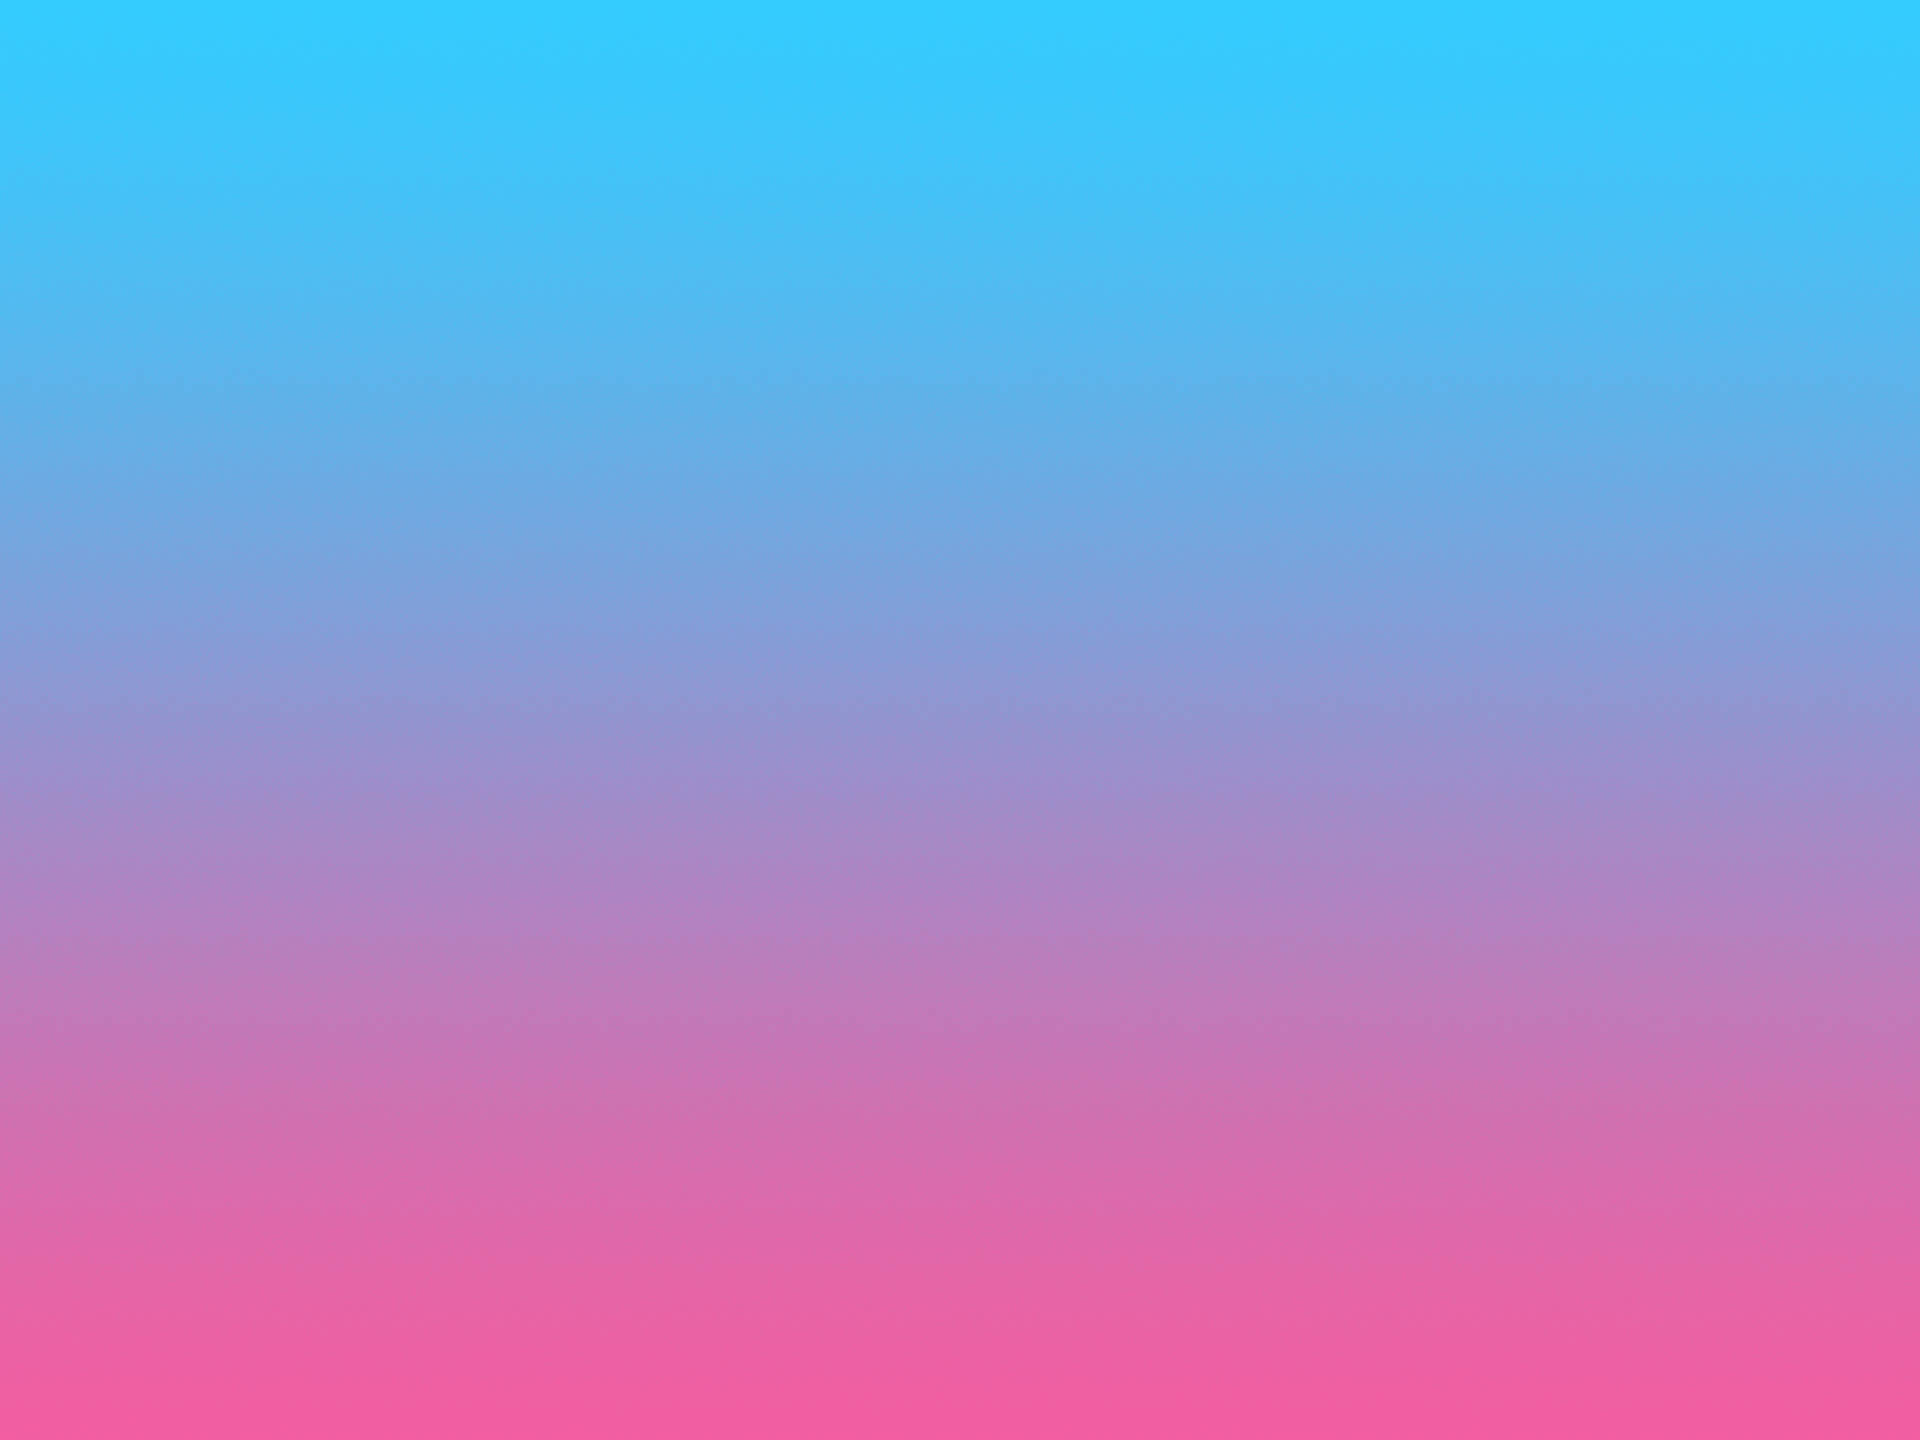 Free Pink Blue Wallpaper Downloads, [100+] Pink Blue Wallpapers for FREE |  